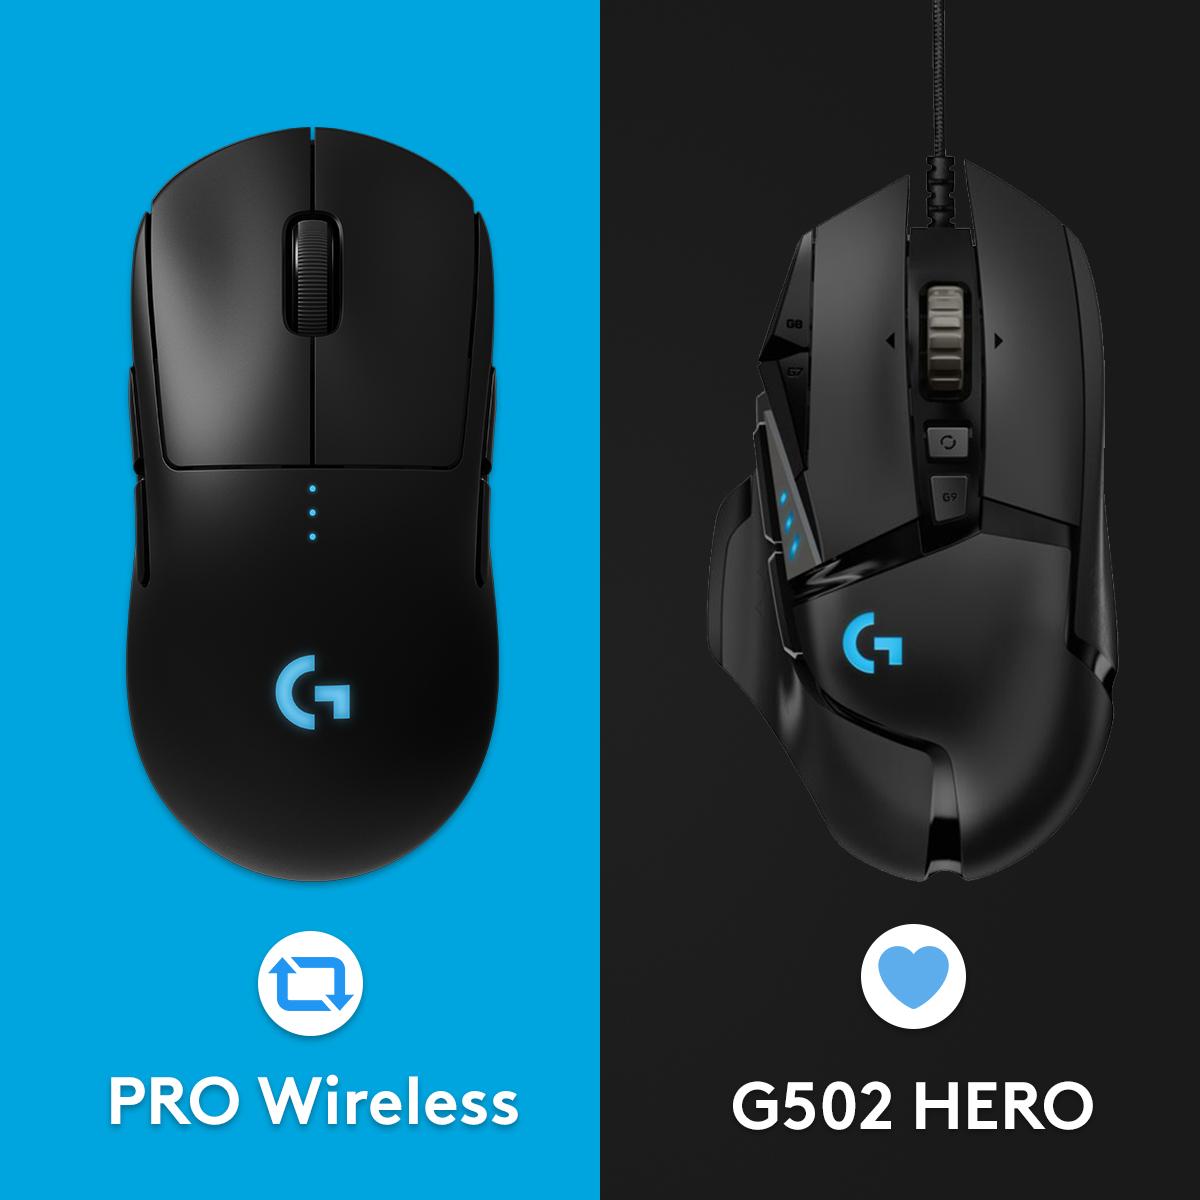 Logitech G on Twitter: "The PRO and G502 HERO named two of the best wired and wireless gaming mice for 2020 by @rockpapershot, which is your #KeepPlaying https://t.co/W6mKFH6zPK https://t.co/NBrOX1kl9E" /